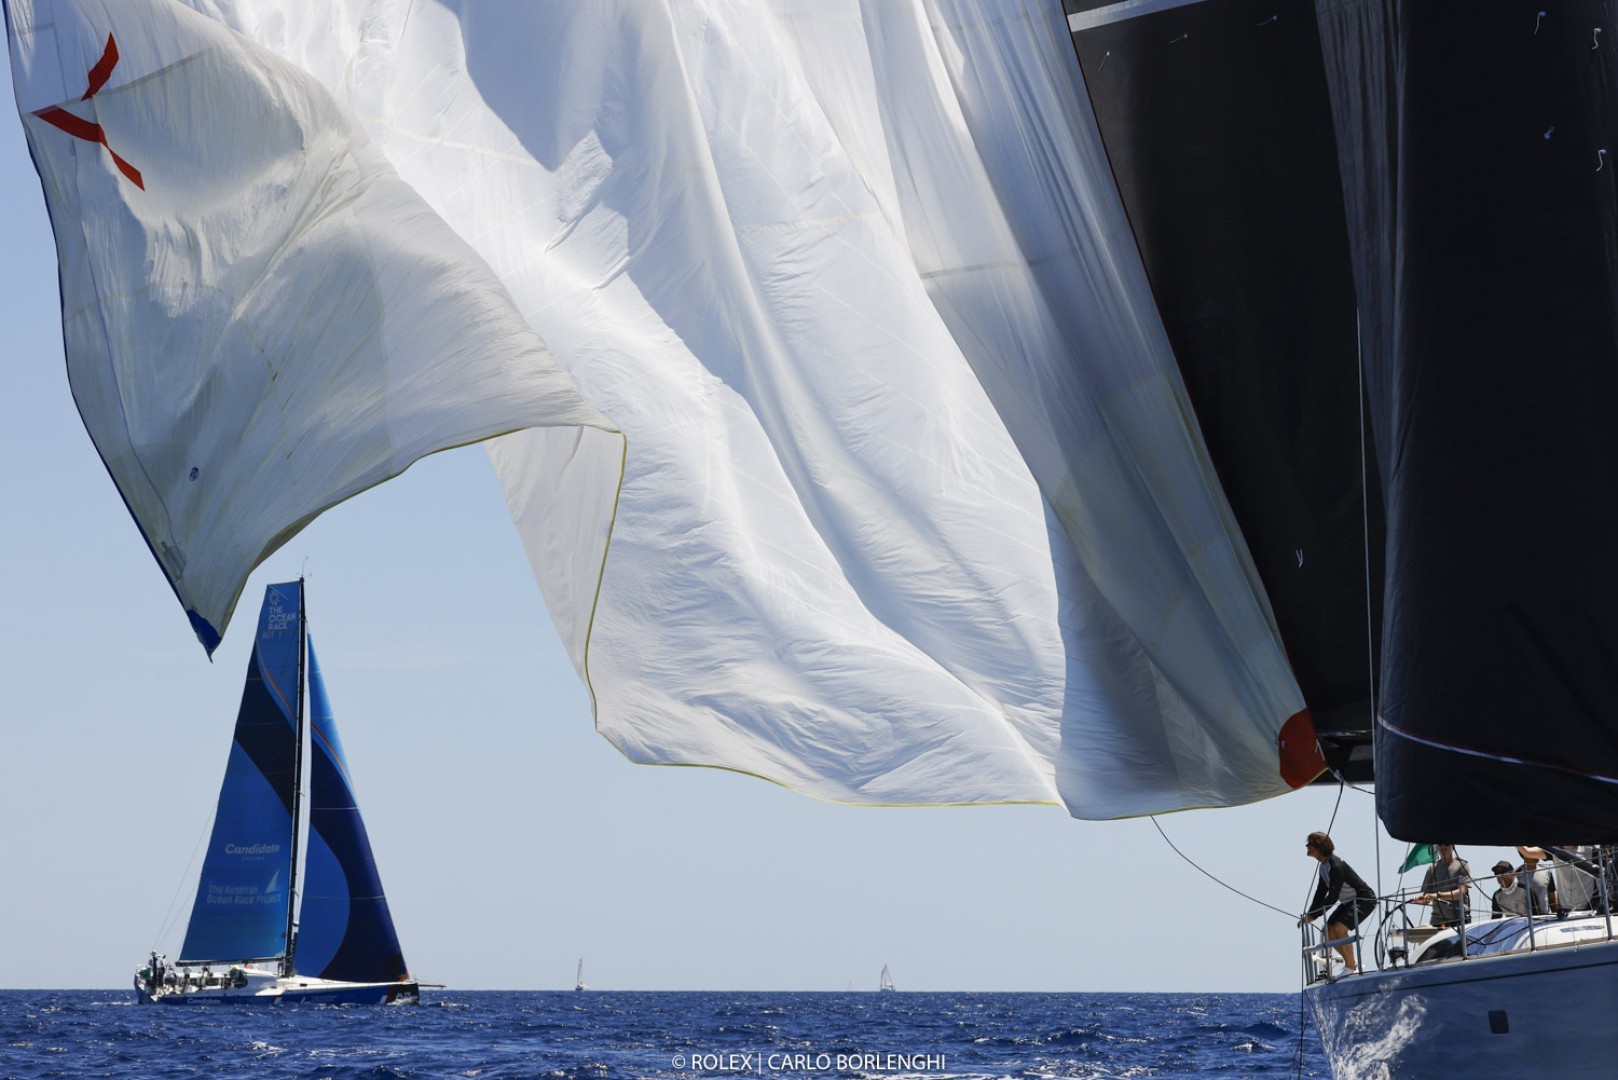 Rolex Giraglia 2022: heat is on for the inshore races